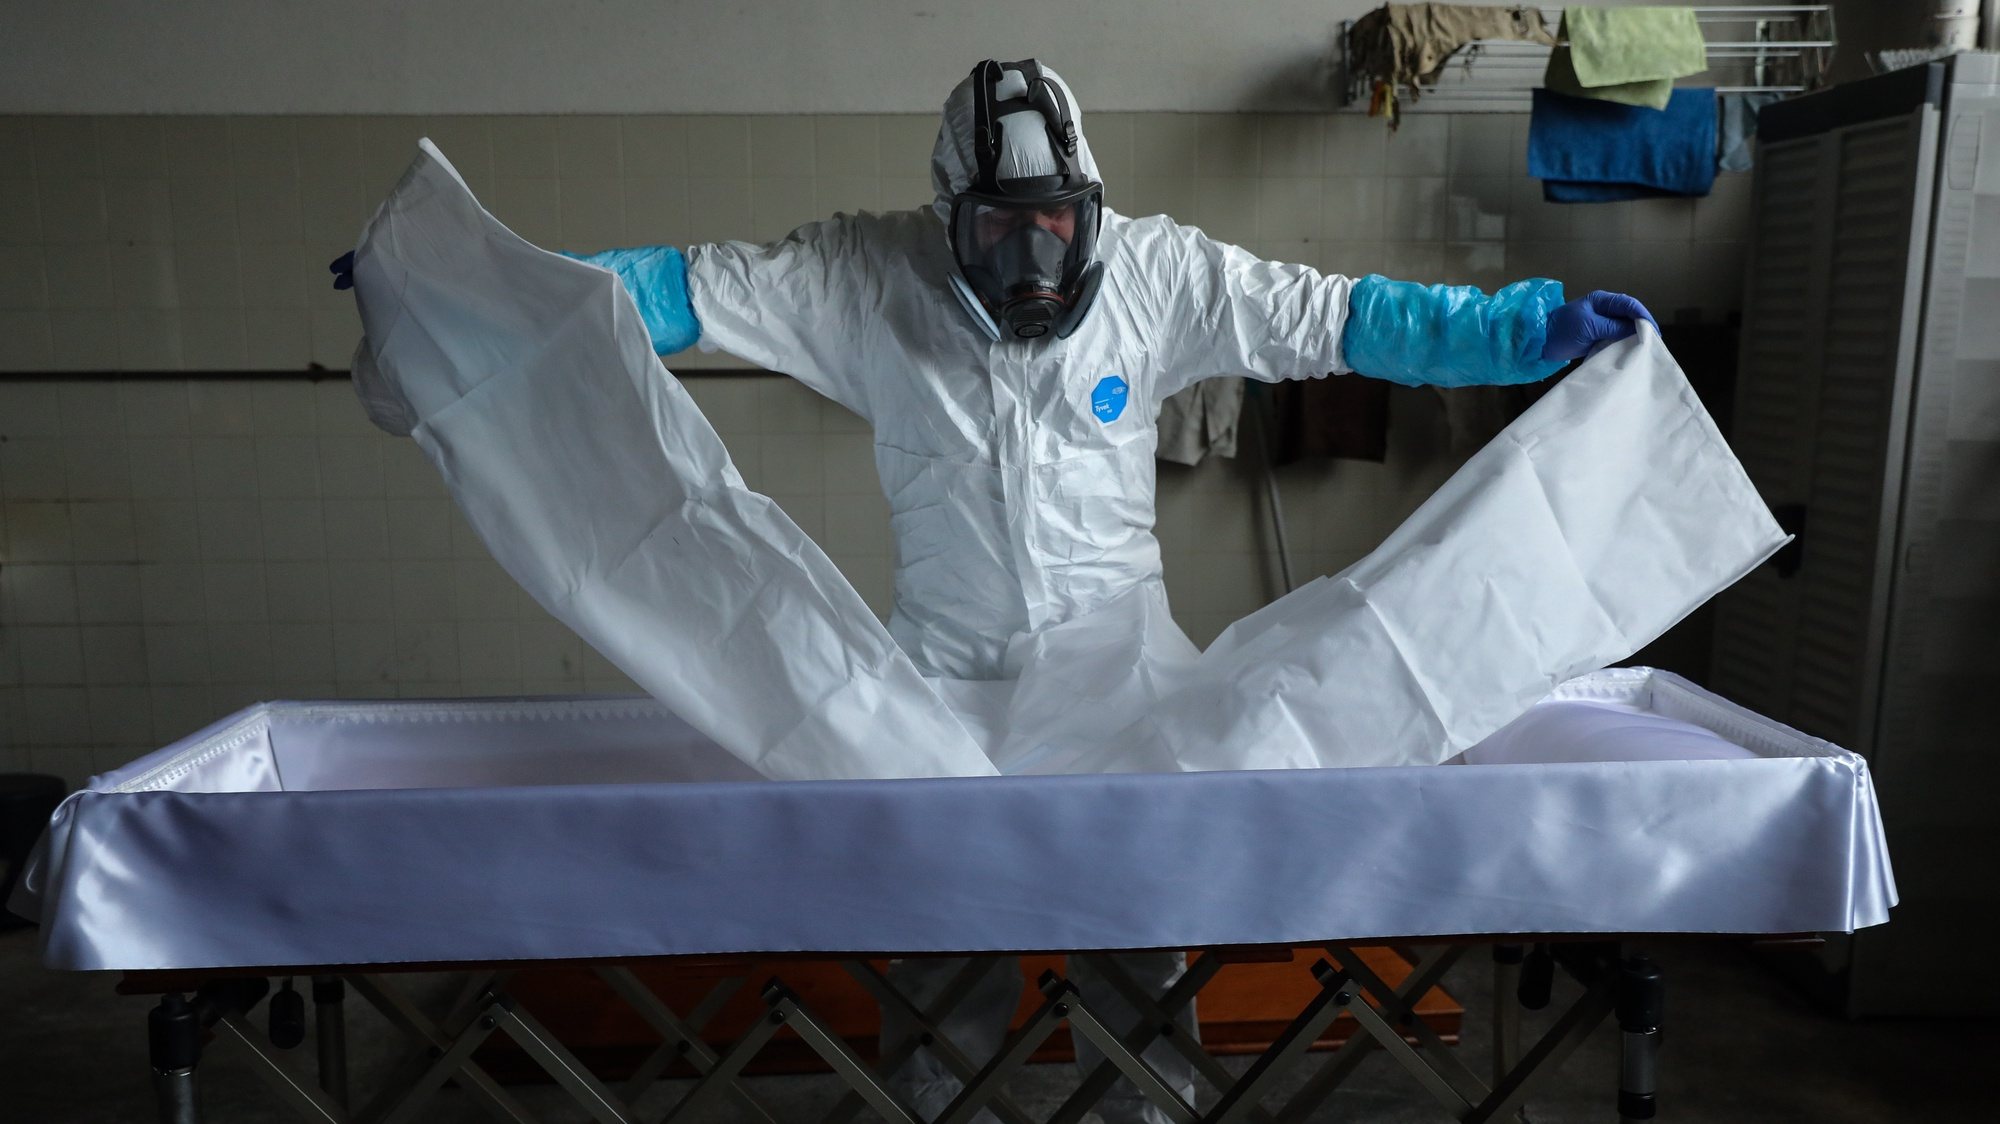 epa08347889 An employee of a funeral home fully protected with a protective suit against radioactive contamination and biological agents, prepares a coffin for a body of a man over 80 years old who died in his home as a victim of covid-19, in Lisbon, Portugal, 03 April 2020 (Issued 07 April 2020). Portugal is in state of emergency until 17 April 2020. Countries around the world are taking increased measures to stem the widespread of the SARS-CoV-2 coronavirus which causes the Covid-19 disease.  EPA/MIGUEL A. LOPES  ATTENTION: This Image is part of a PHOTO SET